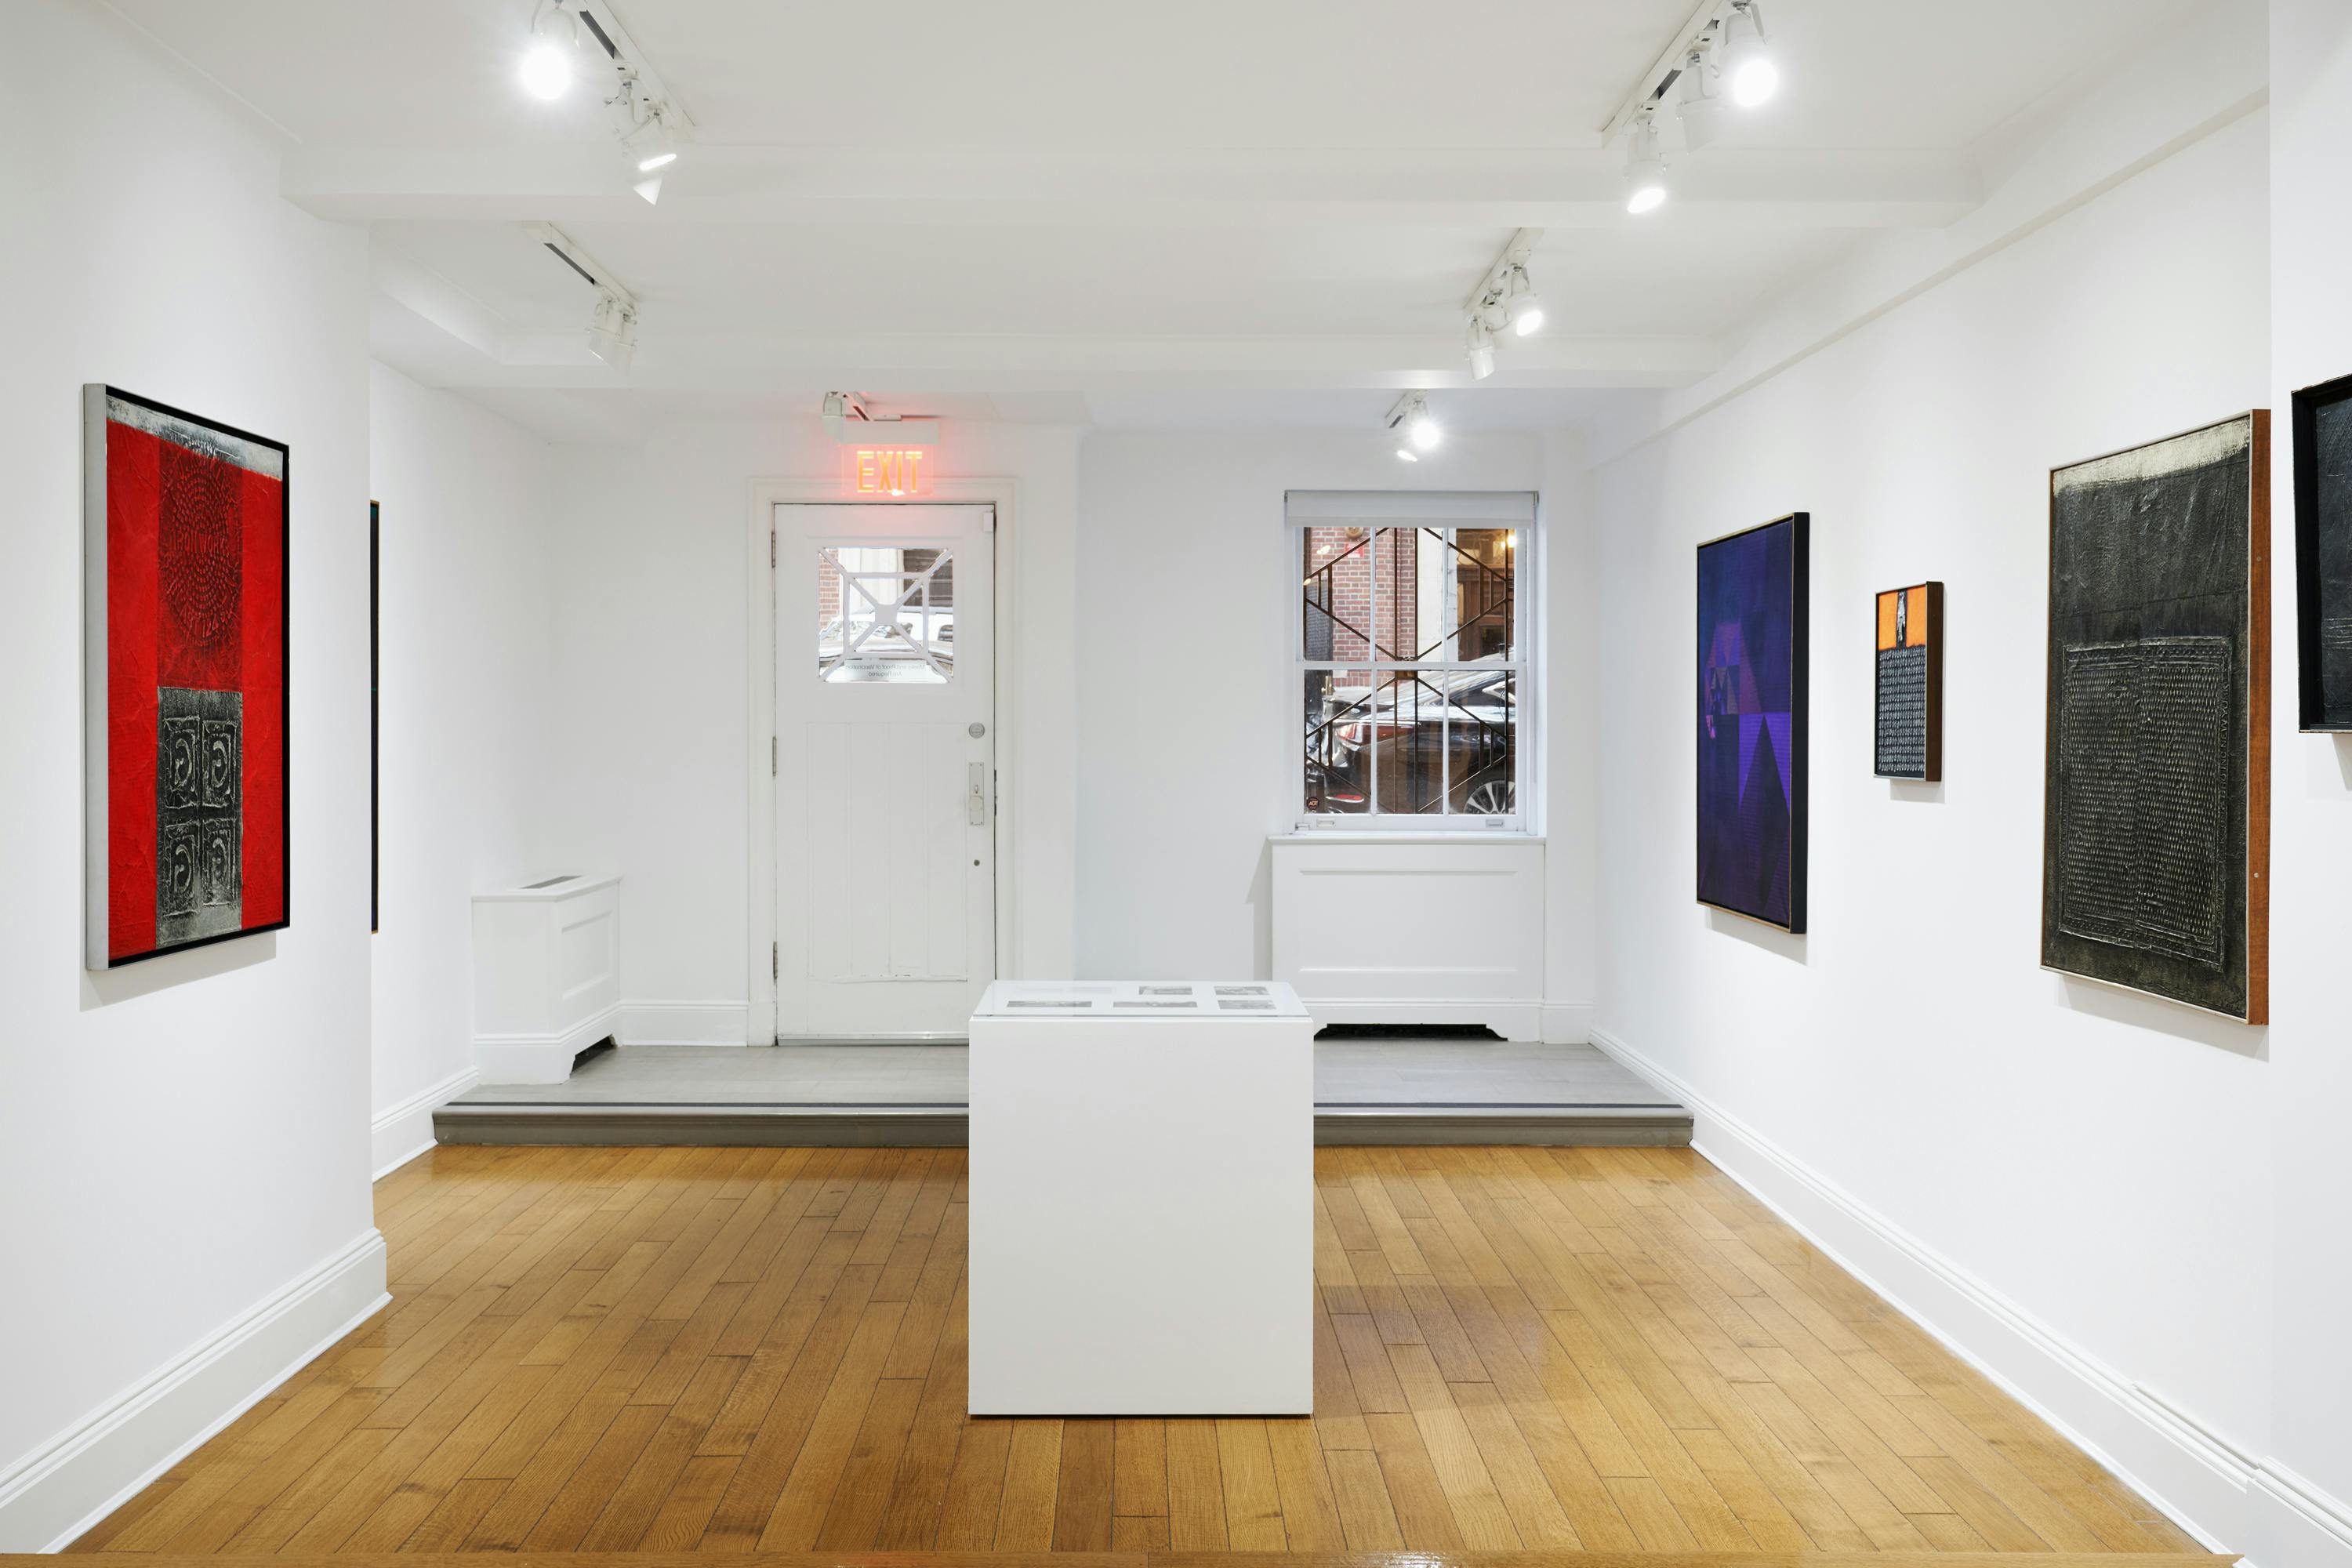 Installation view of José Antonio Fernández-Muro: Geometry in Transfer exhibition showing four paintings and one vitrine.